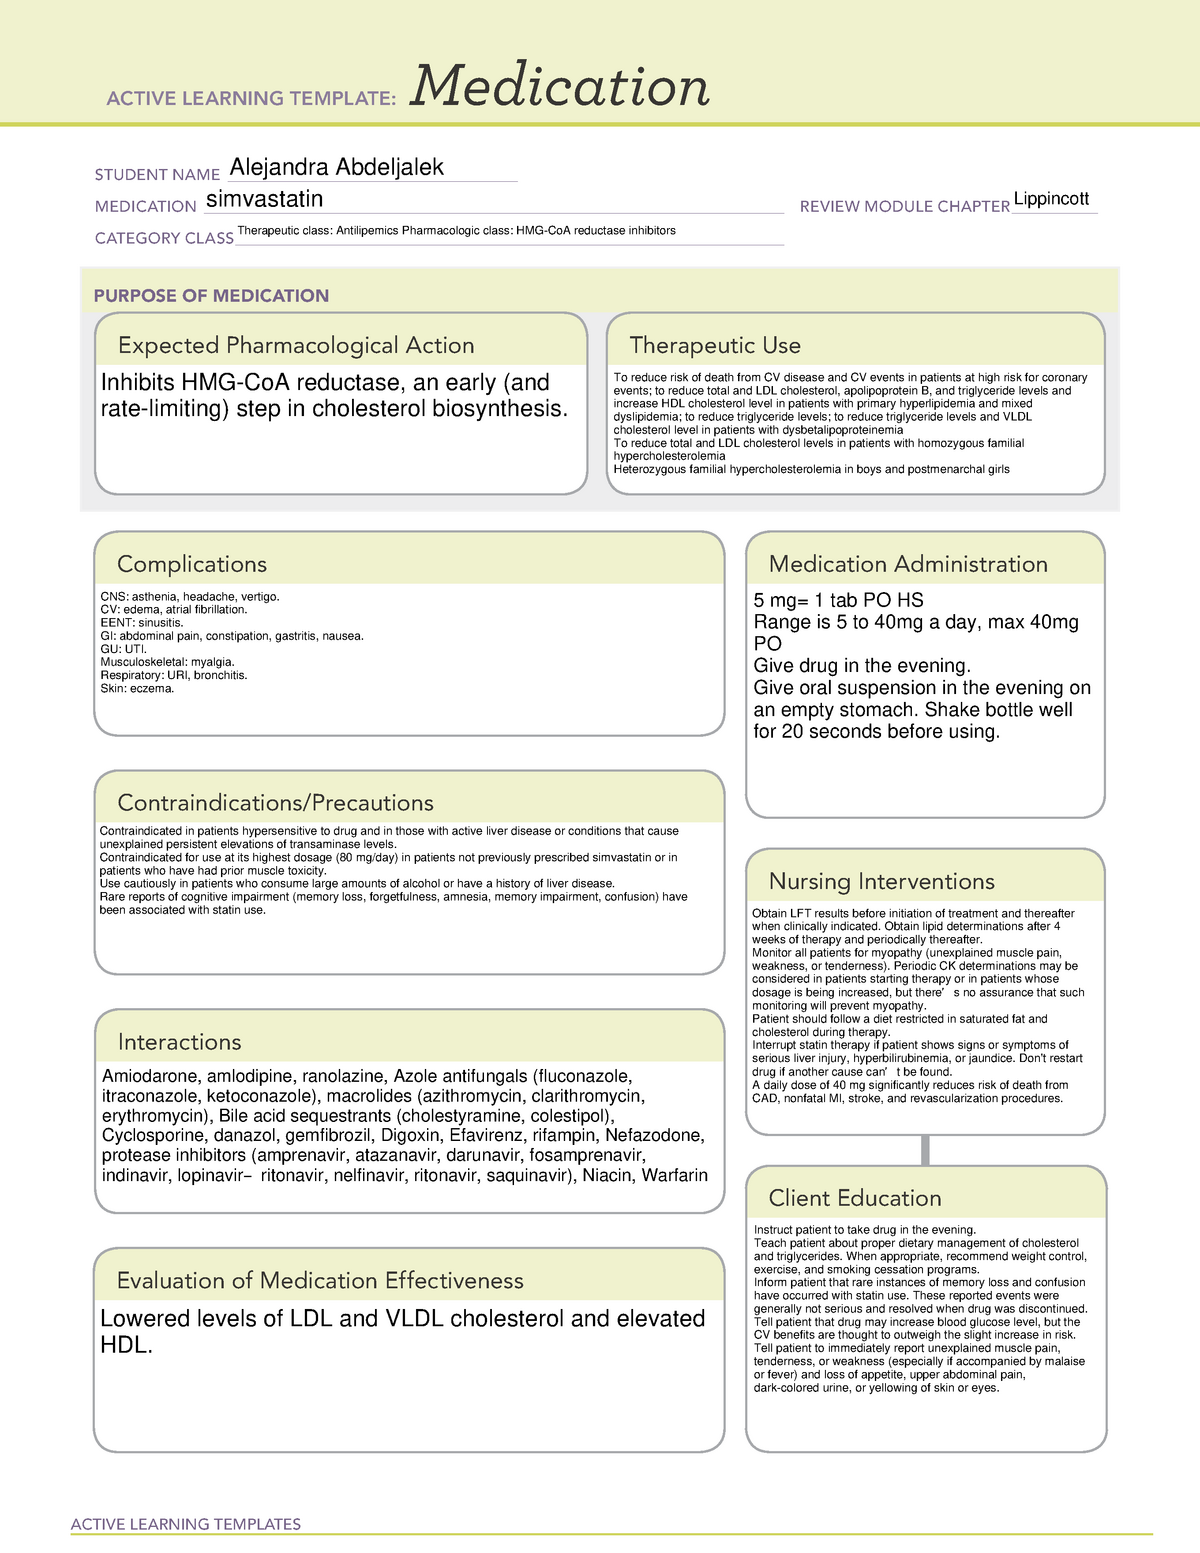 Ati Medication Form Active Learning Template Medication Student Name